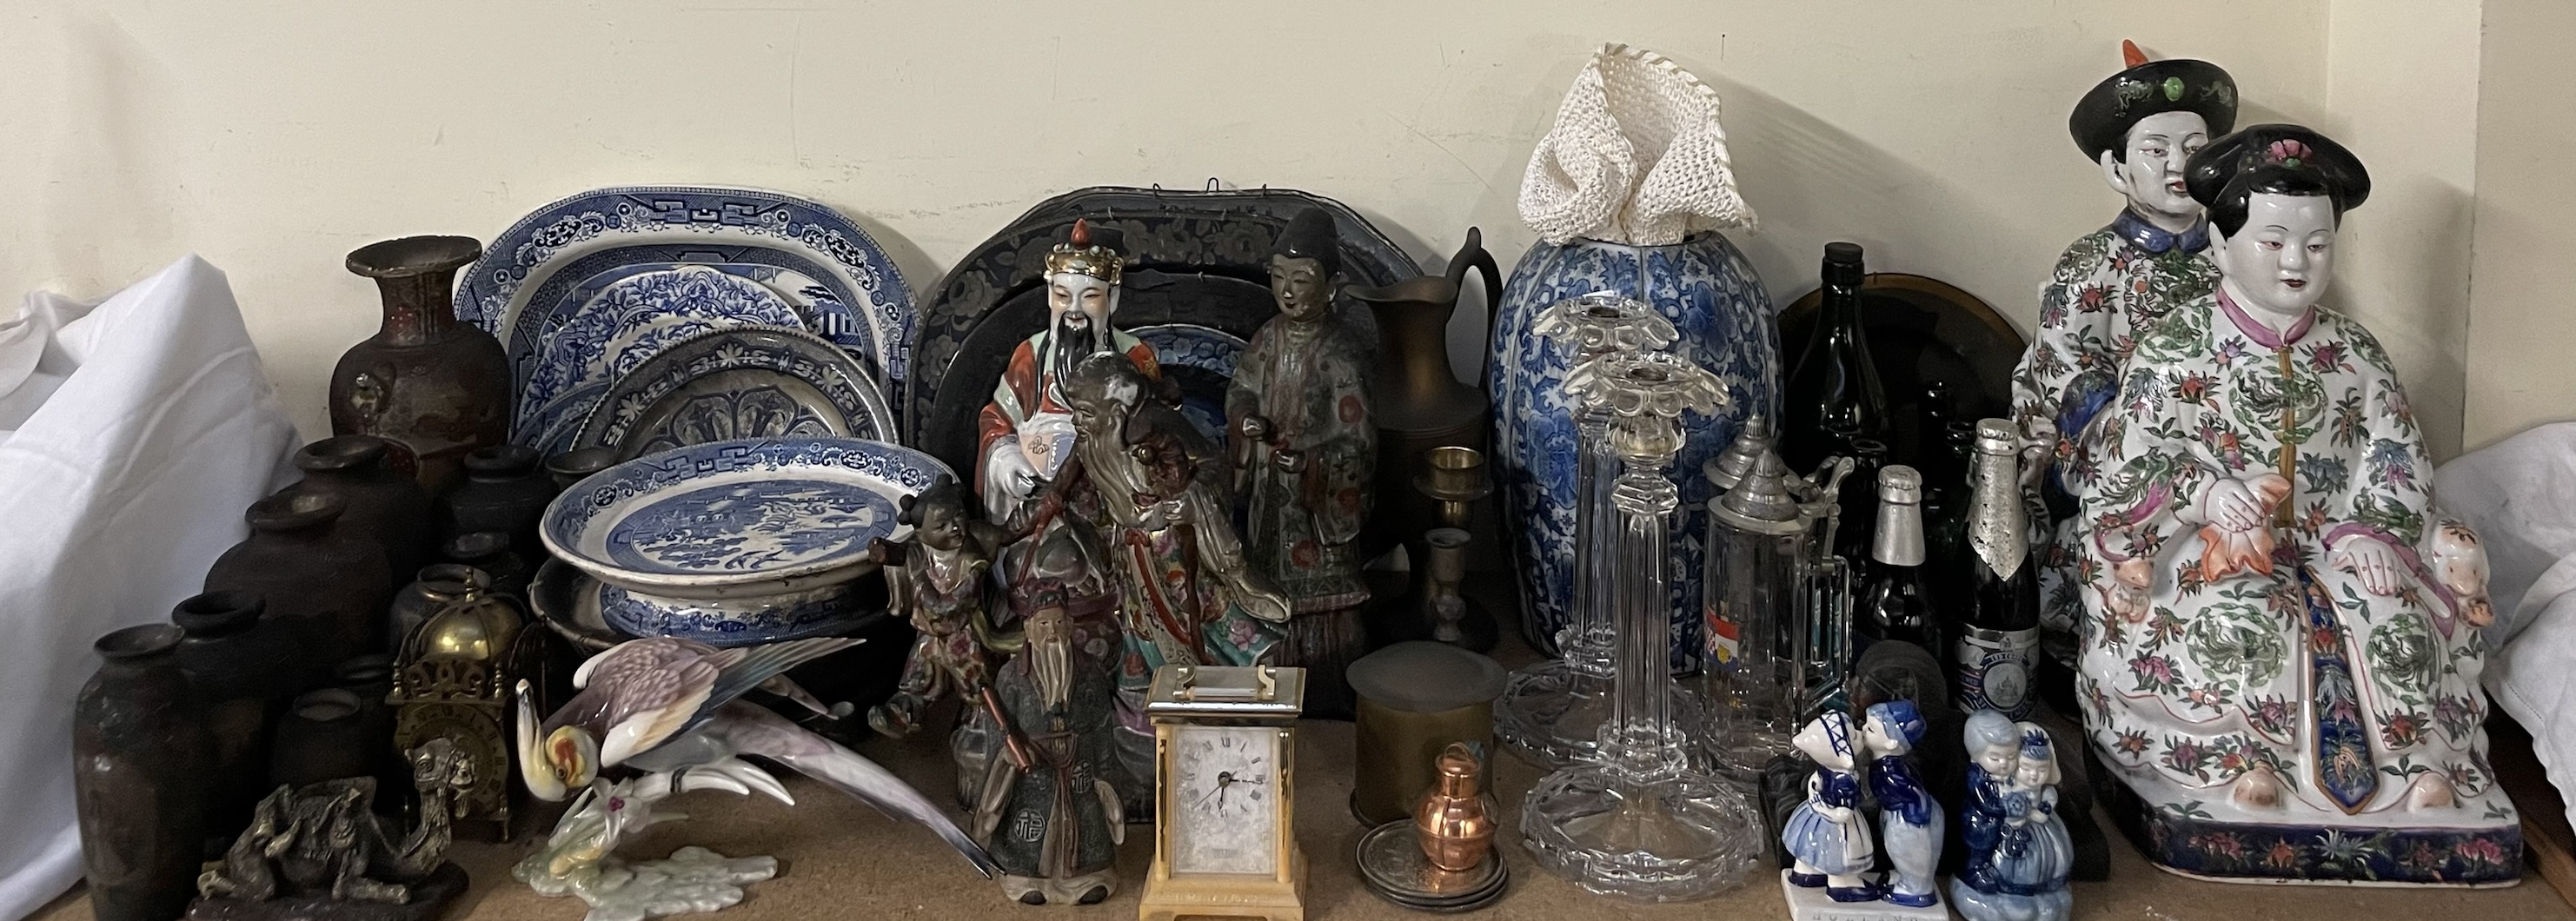 Assorted blue and white pottery plates, Japanese pottery vases, Chinese figures, glass candlesticks,